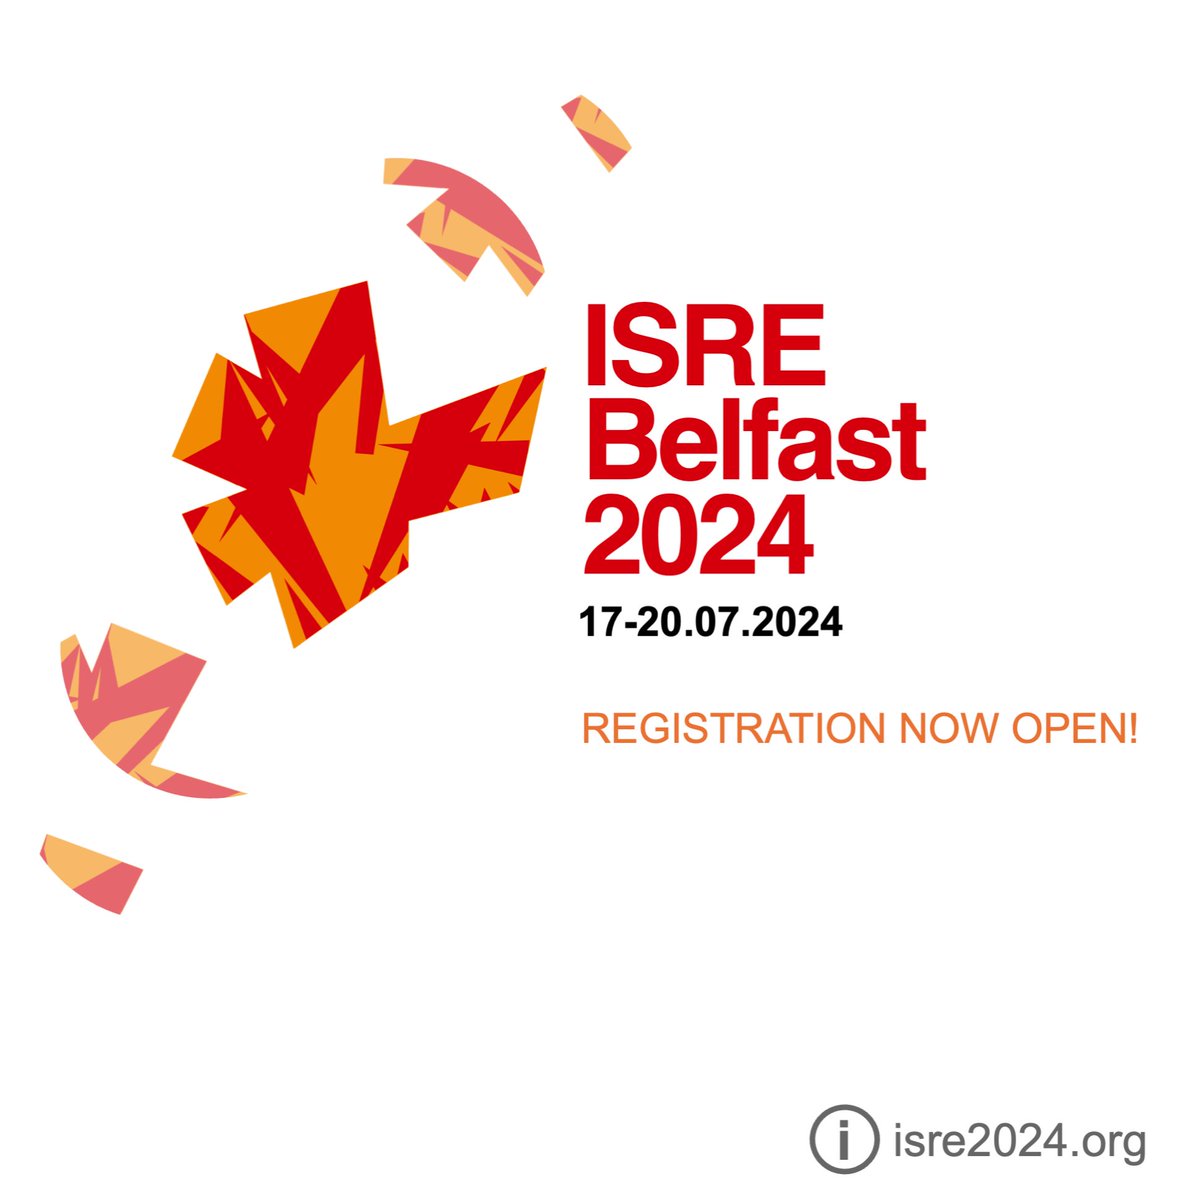 Let's make #ISRE2024 the next big thing post-eclipse! Join scholars from every corner of the world, at any career stage, across disciplines to spark fresh ideas, foster collaborations & enjoy vibrant discussions. Visit isre2024.org! Registration is now open!